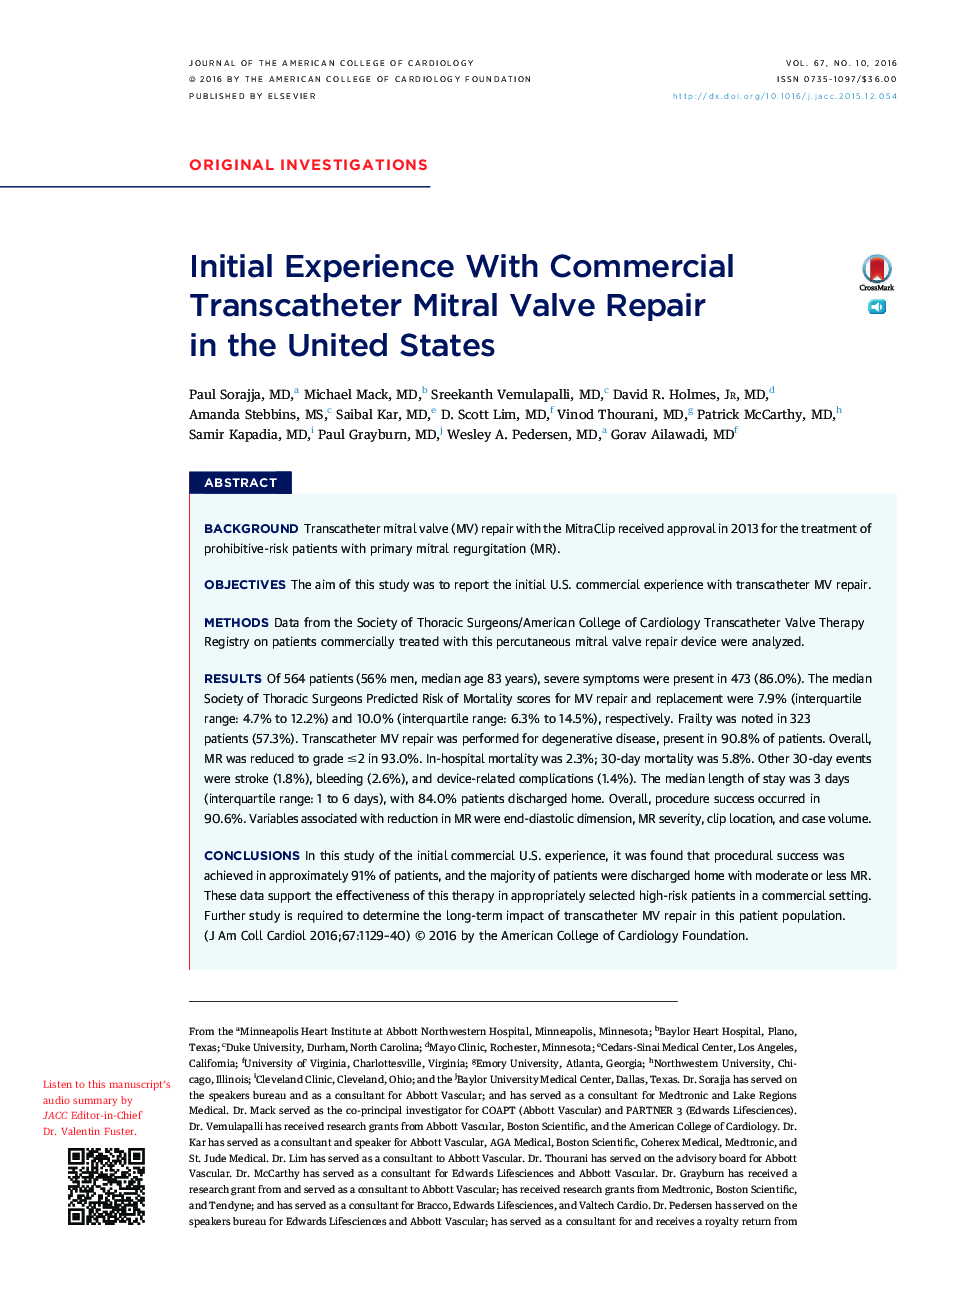 Initial Experience With Commercial Transcatheter Mitral Valve Repair inÂ theÂ United States